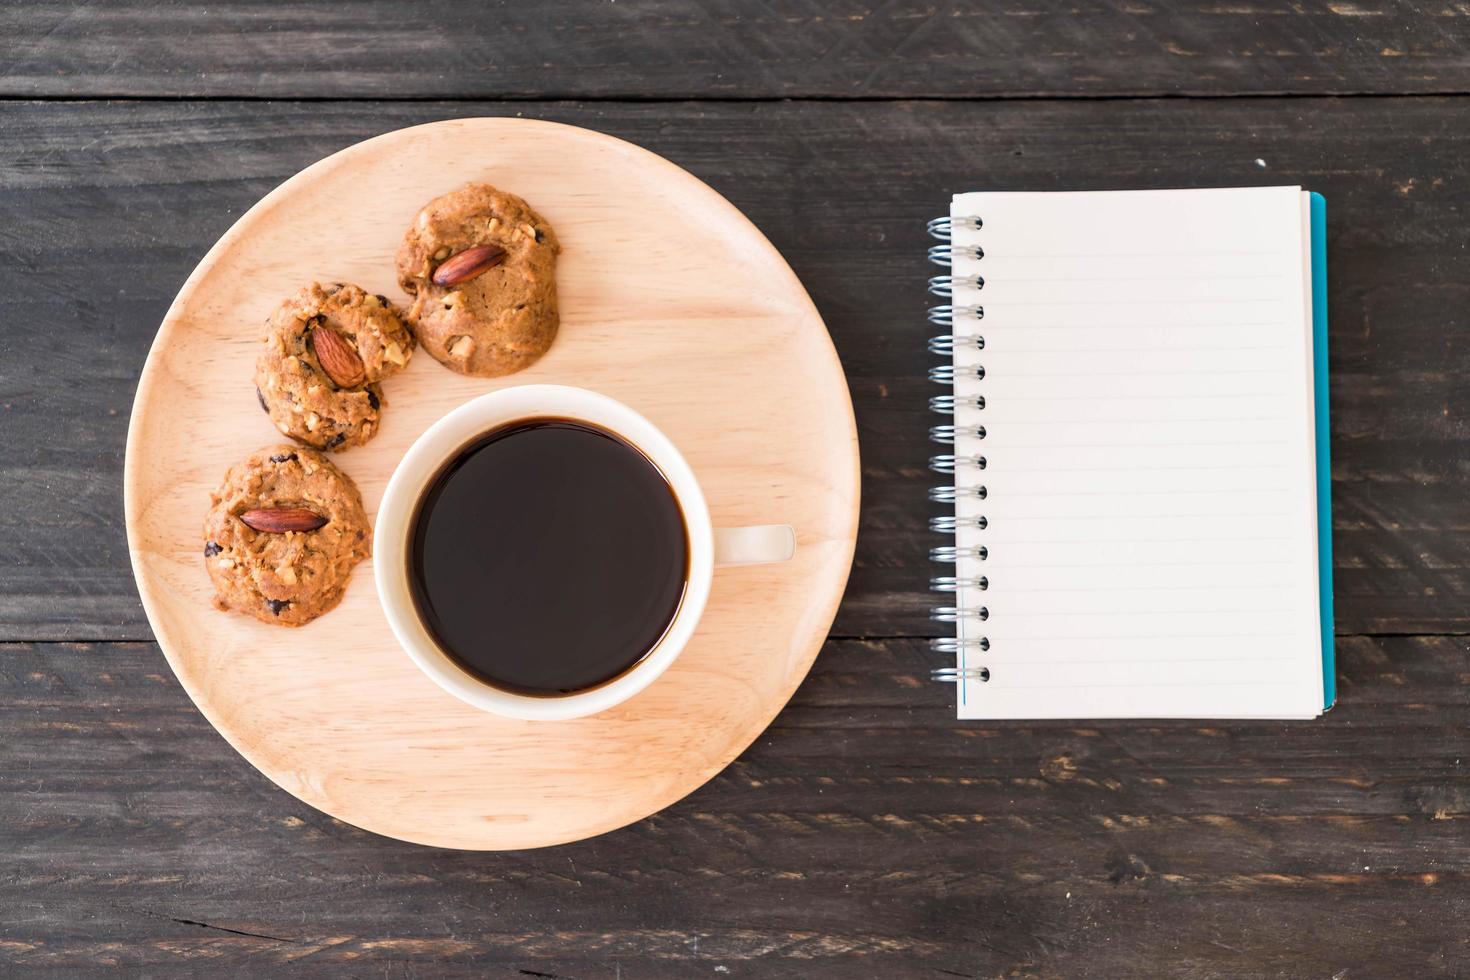 Top view of coffee and cookies with a notebook photo